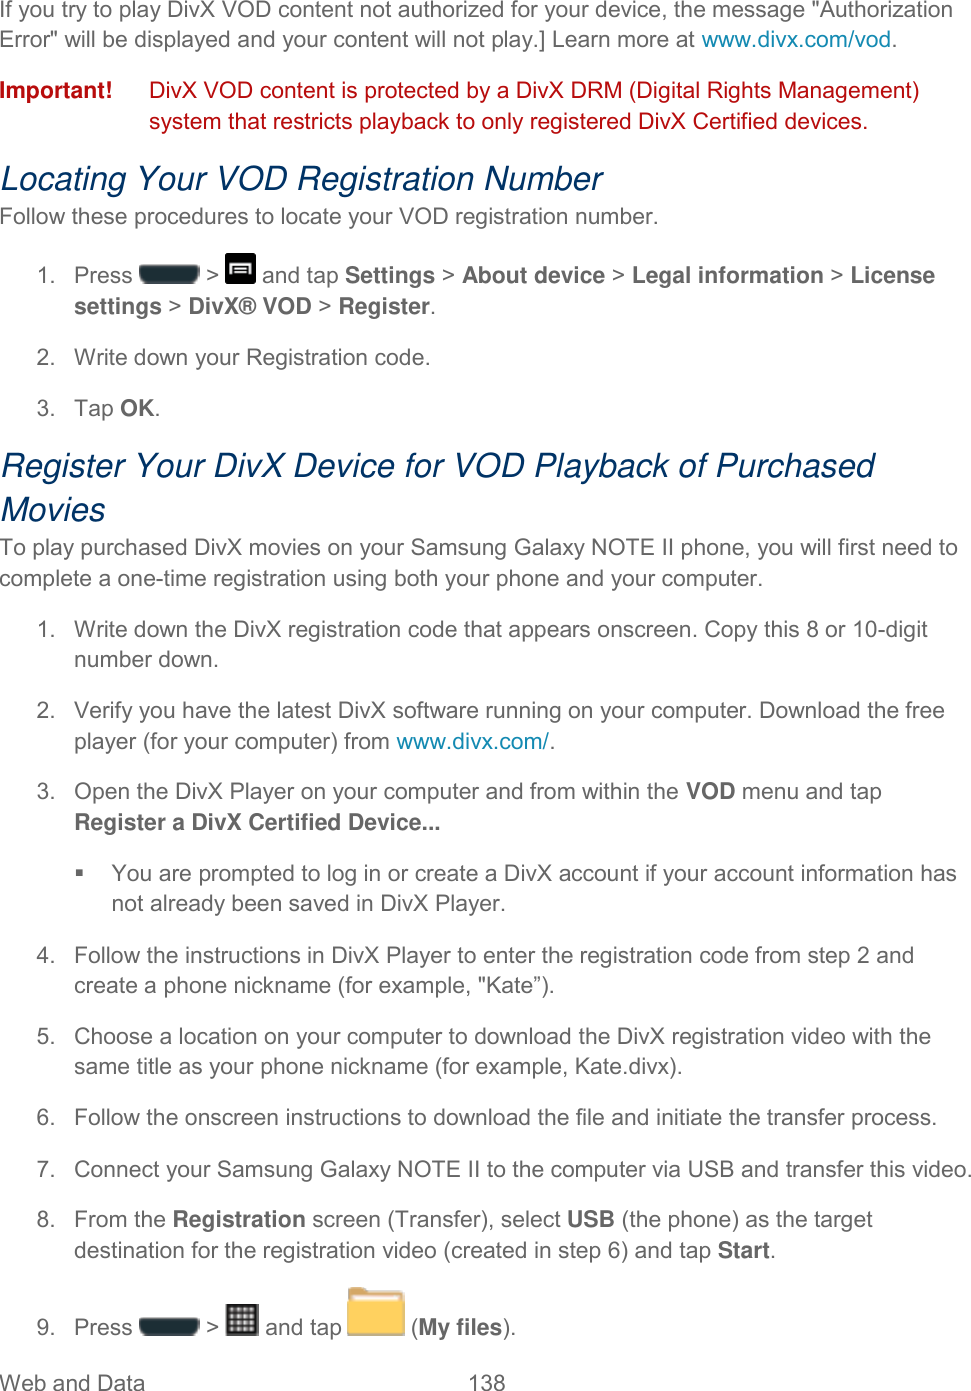 Web and Data  138   If you try to play DivX VOD content not authorized for your device, the message &quot;Authorization Error&quot; will be displayed and your content will not play.] Learn more at www.divx.com/vod. Important!   DivX VOD content is protected by a DivX DRM (Digital Rights Management) system that restricts playback to only registered DivX Certified devices. Locating Your VOD Registration Number Follow these procedures to locate your VOD registration number. 1.  Press   &gt;   and tap Settings &gt; About device &gt; Legal information &gt; License settings &gt; DivX® VOD &gt; Register. 2.  Write down your Registration code. 3.  Tap OK. Register Your DivX Device for VOD Playback of Purchased Movies To play purchased DivX movies on your Samsung Galaxy NOTE II phone, you will first need to complete a one-time registration using both your phone and your computer.  1.  Write down the DivX registration code that appears onscreen. Copy this 8 or 10-digit number down. 2.  Verify you have the latest DivX software running on your computer. Download the free player (for your computer) from www.divx.com/.  3.  Open the DivX Player on your computer and from within the VOD menu and tap Register a DivX Certified Device...   You are prompted to log in or create a DivX account if your account information has not already been saved in DivX Player. 4.  Follow the instructions in DivX Player to enter the registration code from step 2 and create a phone nickname (for example, &quot;Kate”). 5.  Choose a location on your computer to download the DivX registration video with the same title as your phone nickname (for example, Kate.divx). 6.  Follow the onscreen instructions to download the file and initiate the transfer process. 7.  Connect your Samsung Galaxy NOTE II to the computer via USB and transfer this video.  8.  From the Registration screen (Transfer), select USB (the phone) as the target destination for the registration video (created in step 6) and tap Start. 9.  Press   &gt;   and tap   (My files). 